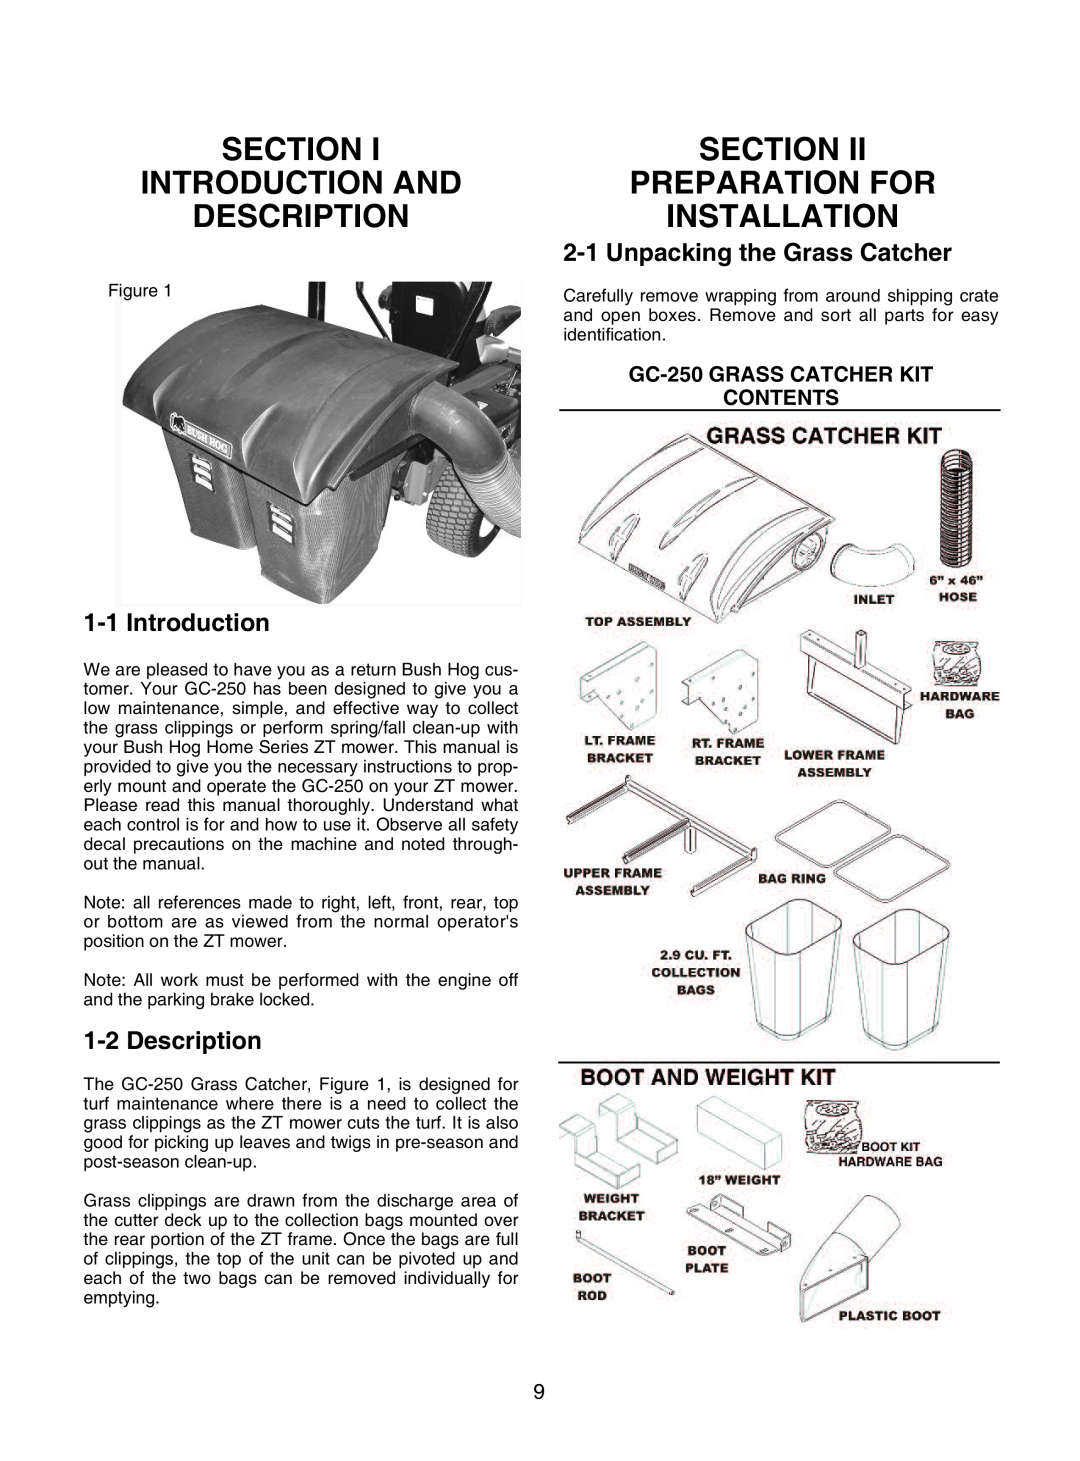 Bush Hog GC-250 manual Section Introduction And Description, Section Preparation For Installation, 1-1Introduction 